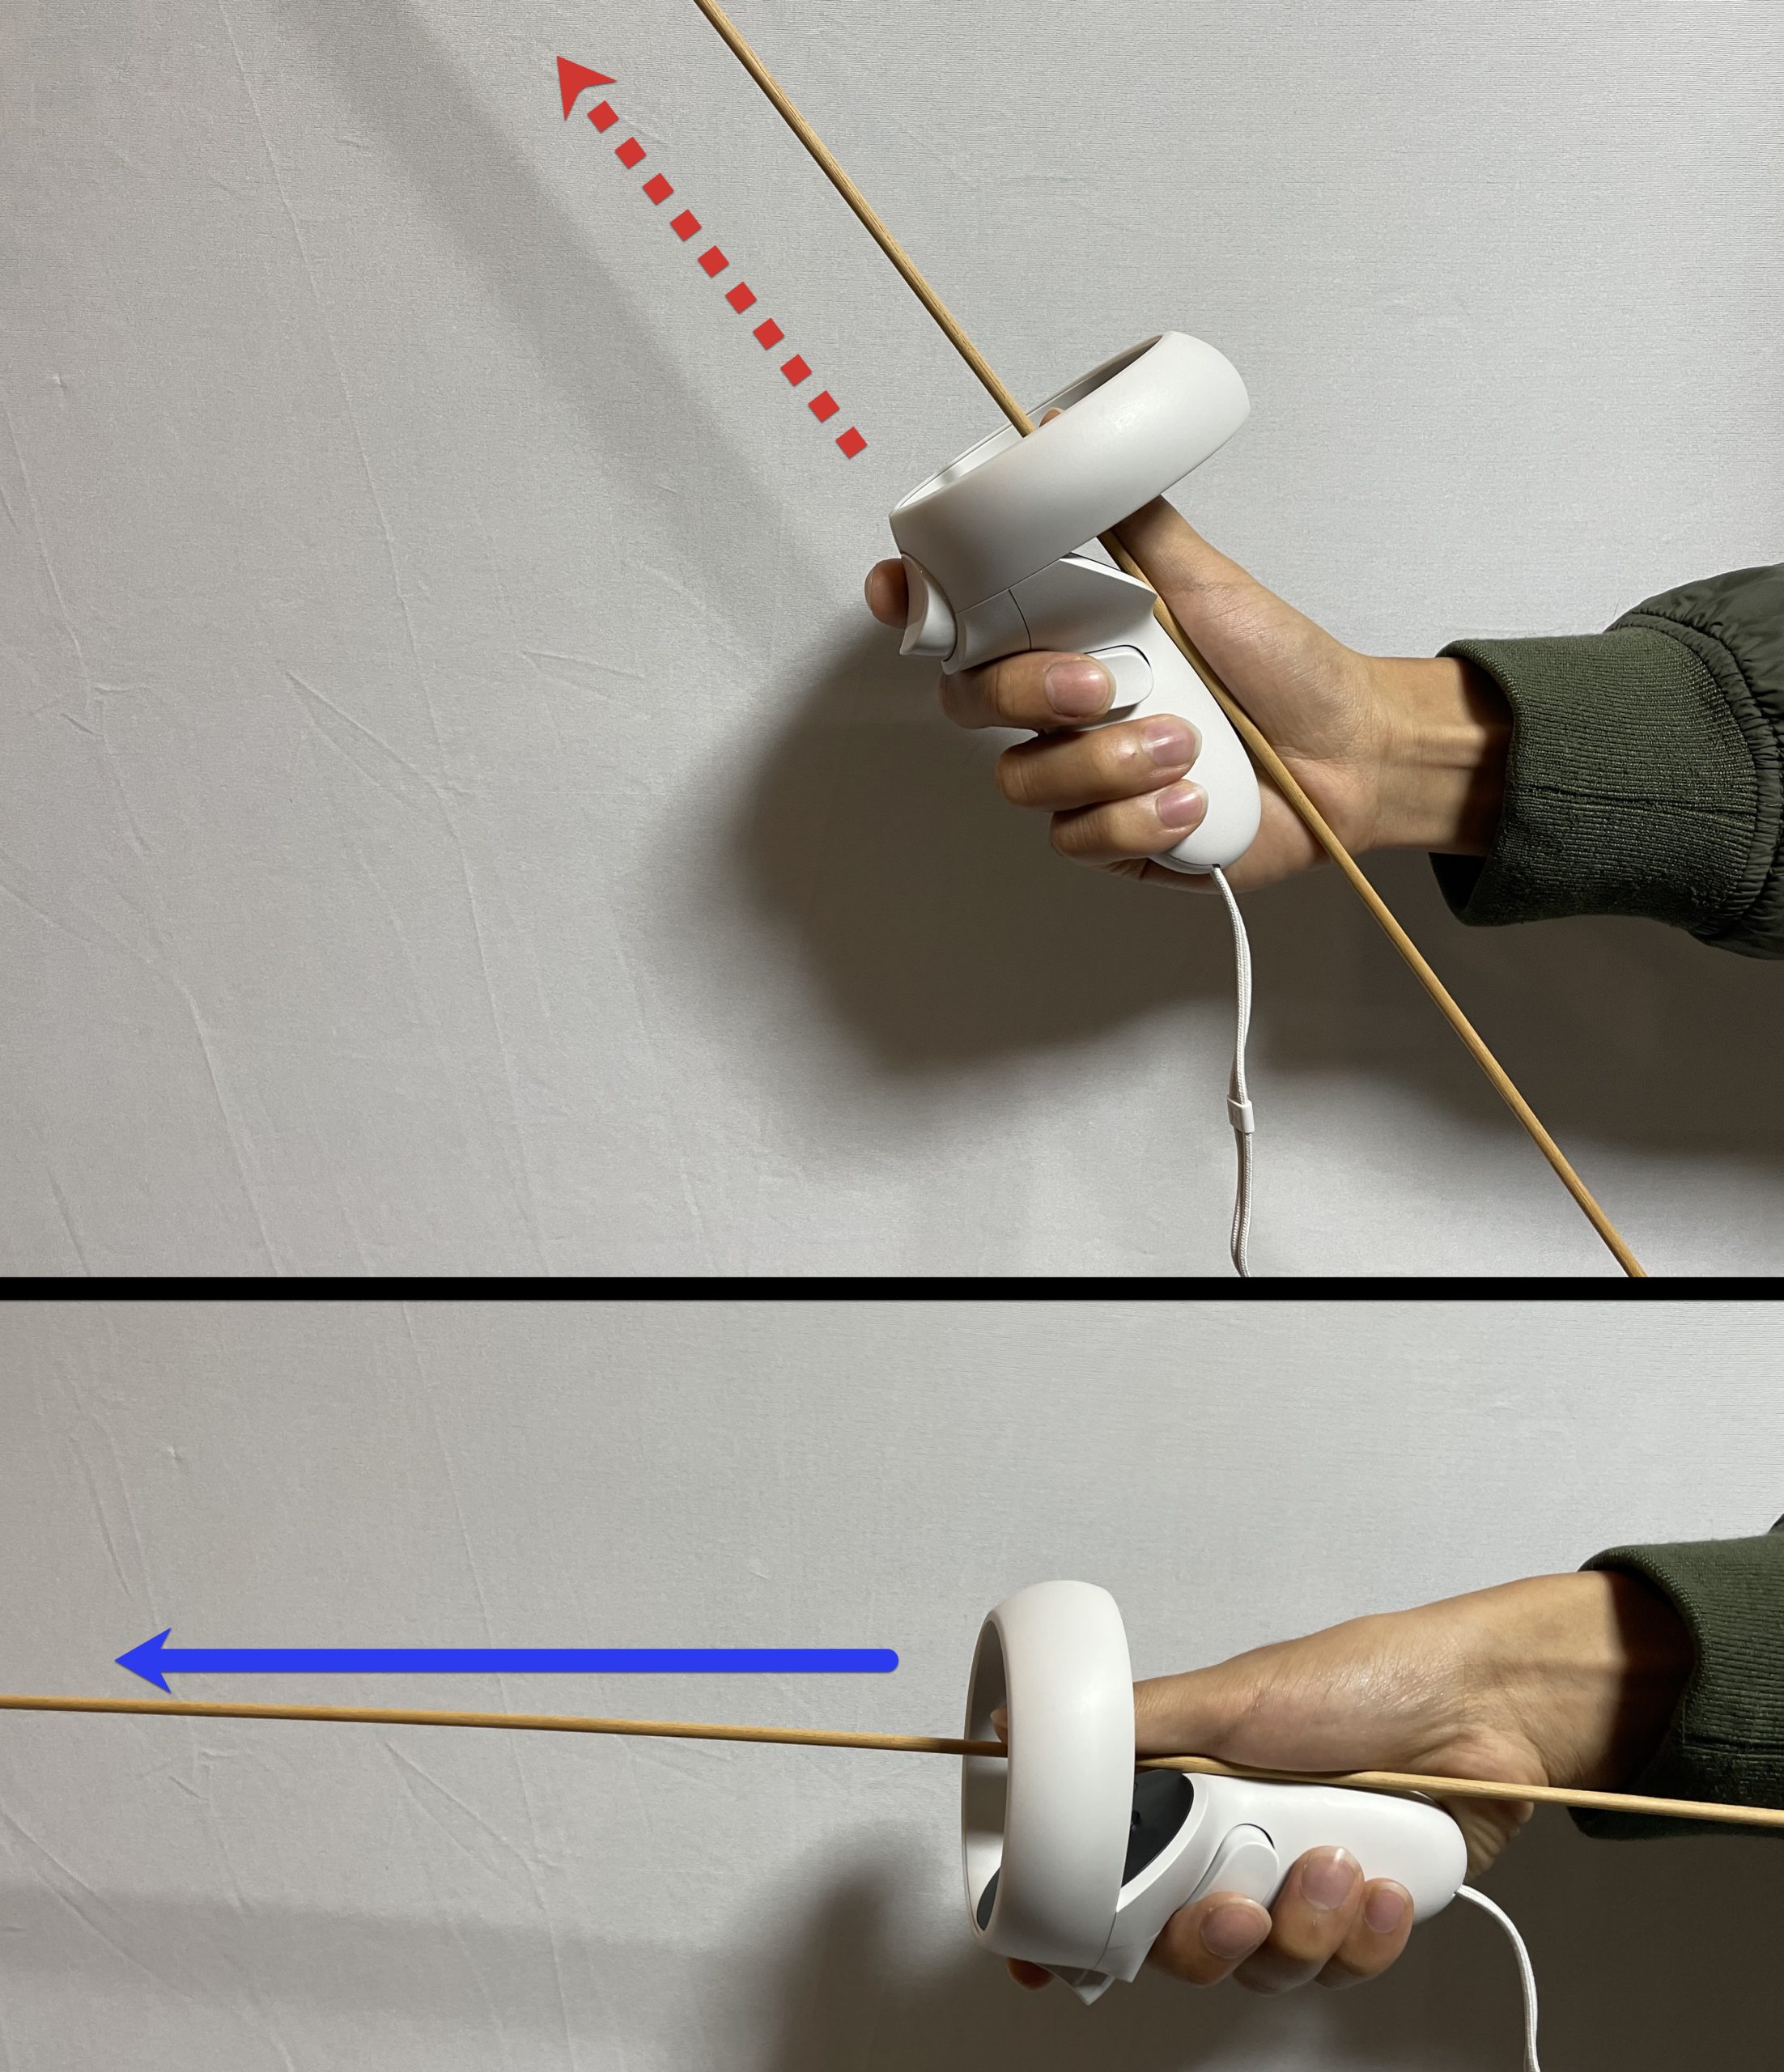 Hand holding a controller in a natural relaxed position. The raycaster of the controller is illustrated with a wooden stick. The stick is pointing upward.